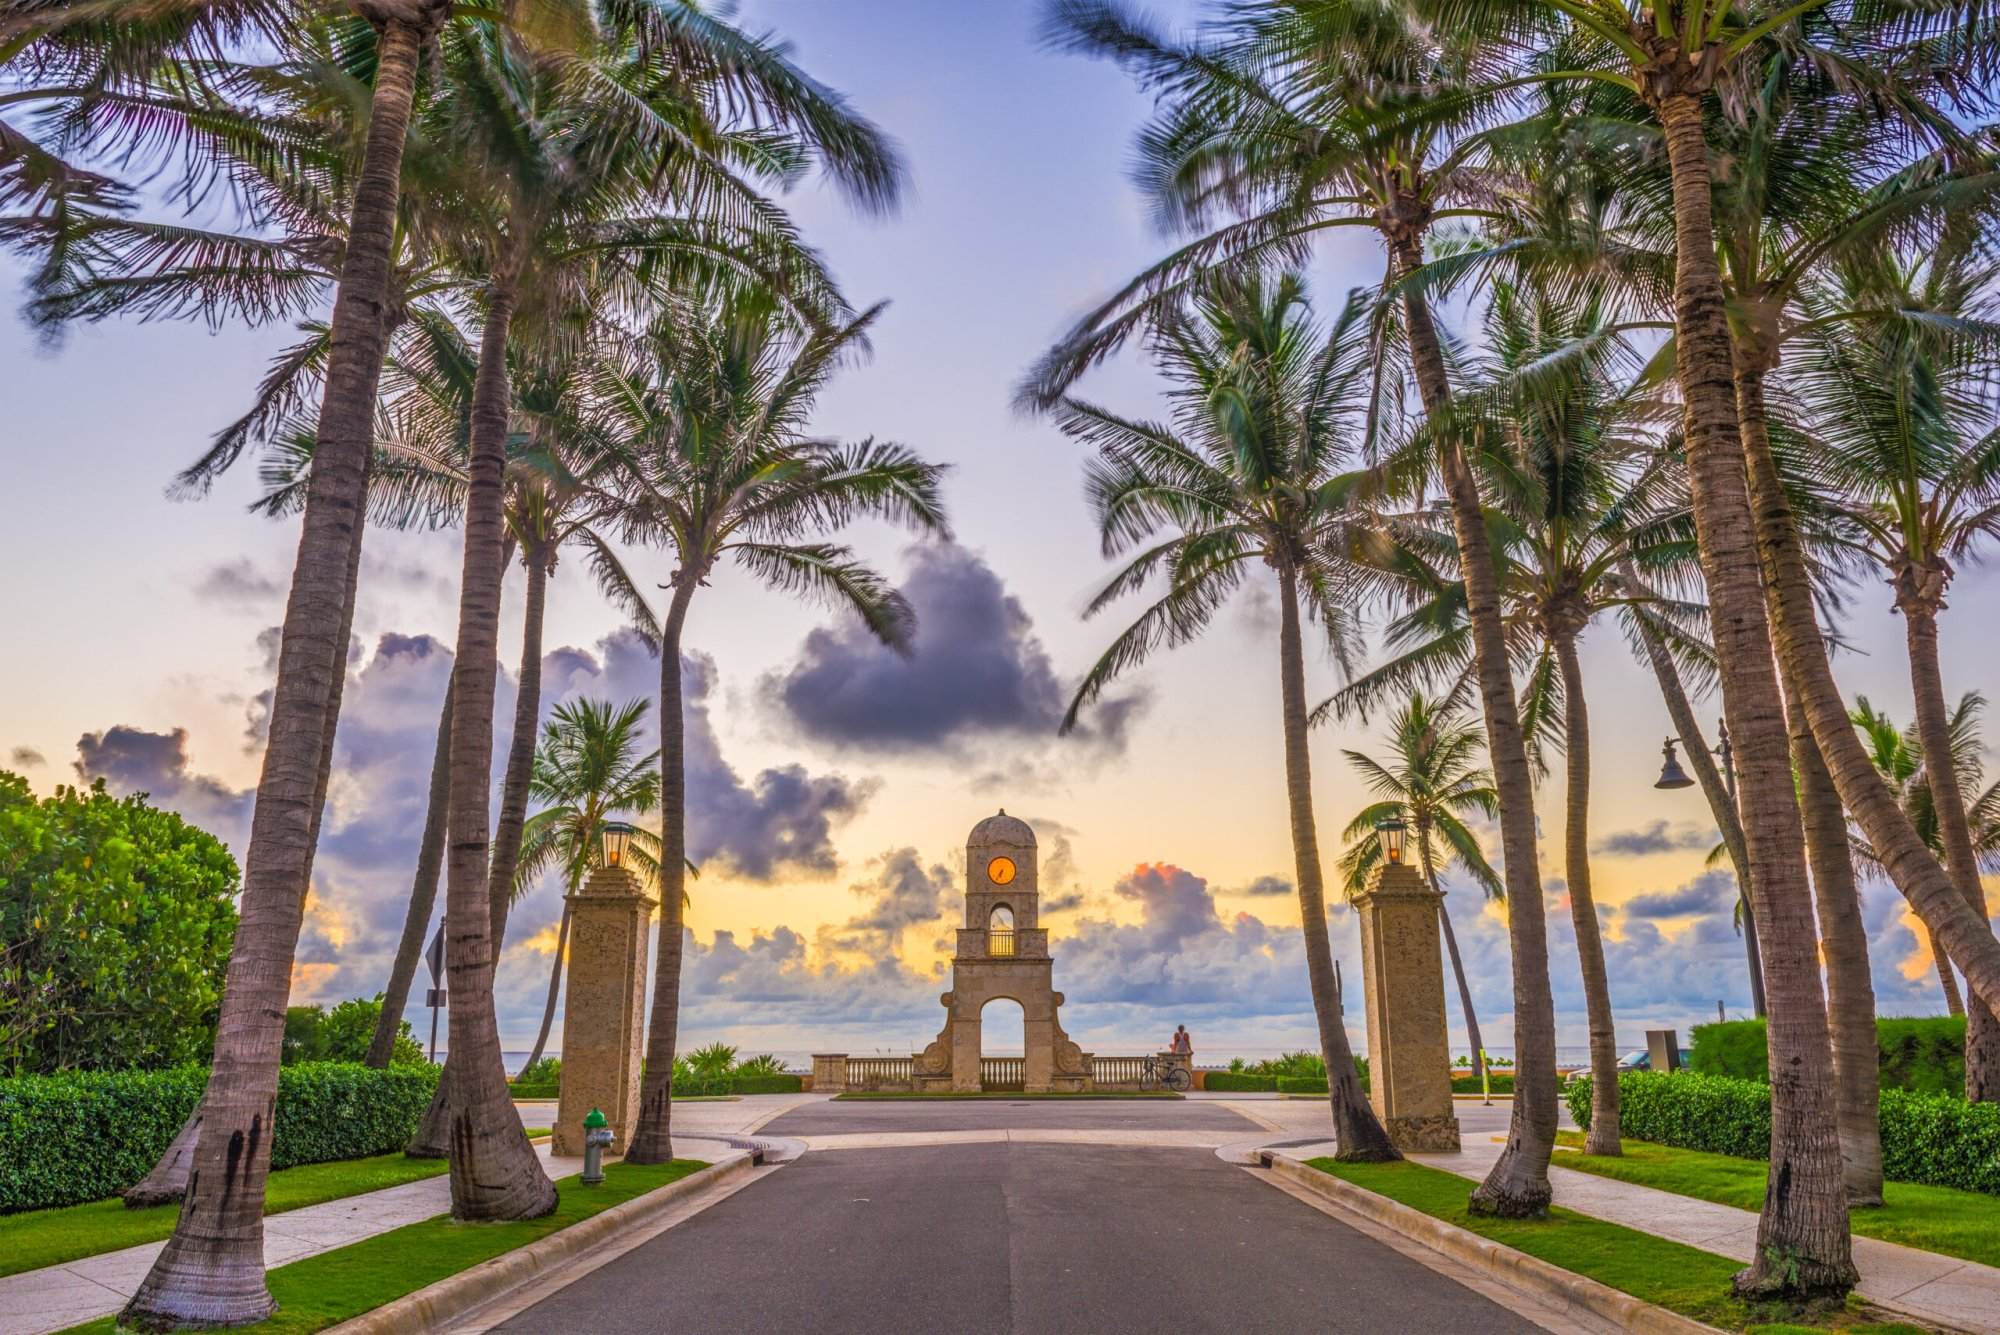 A road with palm trees and a statue in the background.